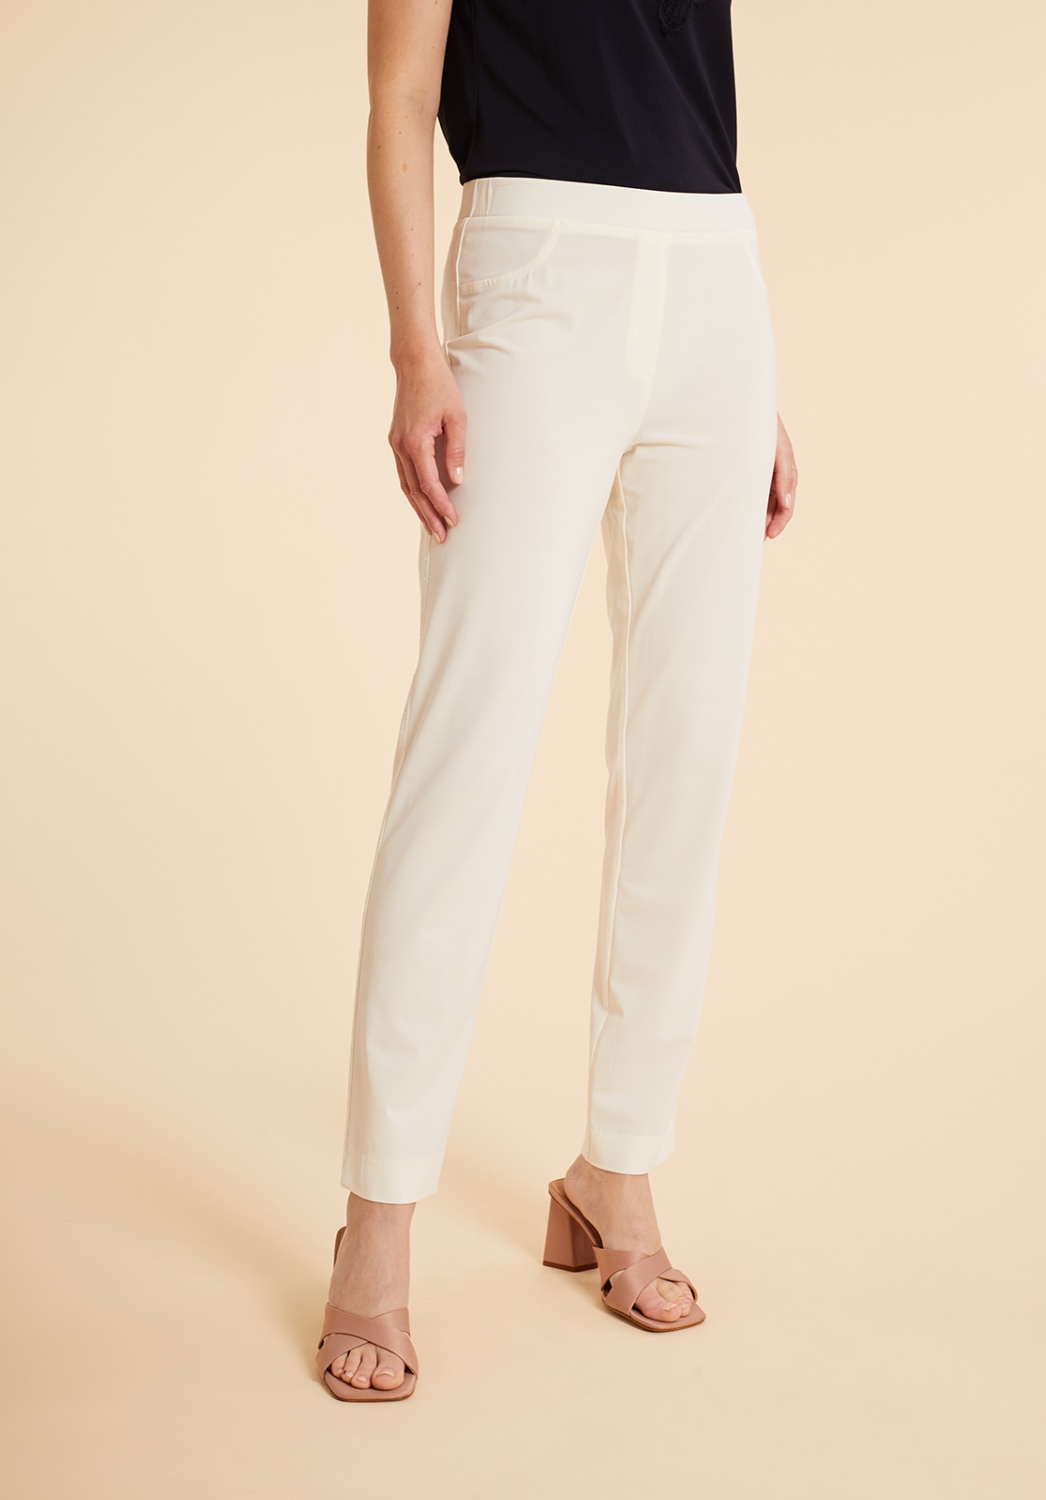 White Knit Trousers With Rhinestones 1